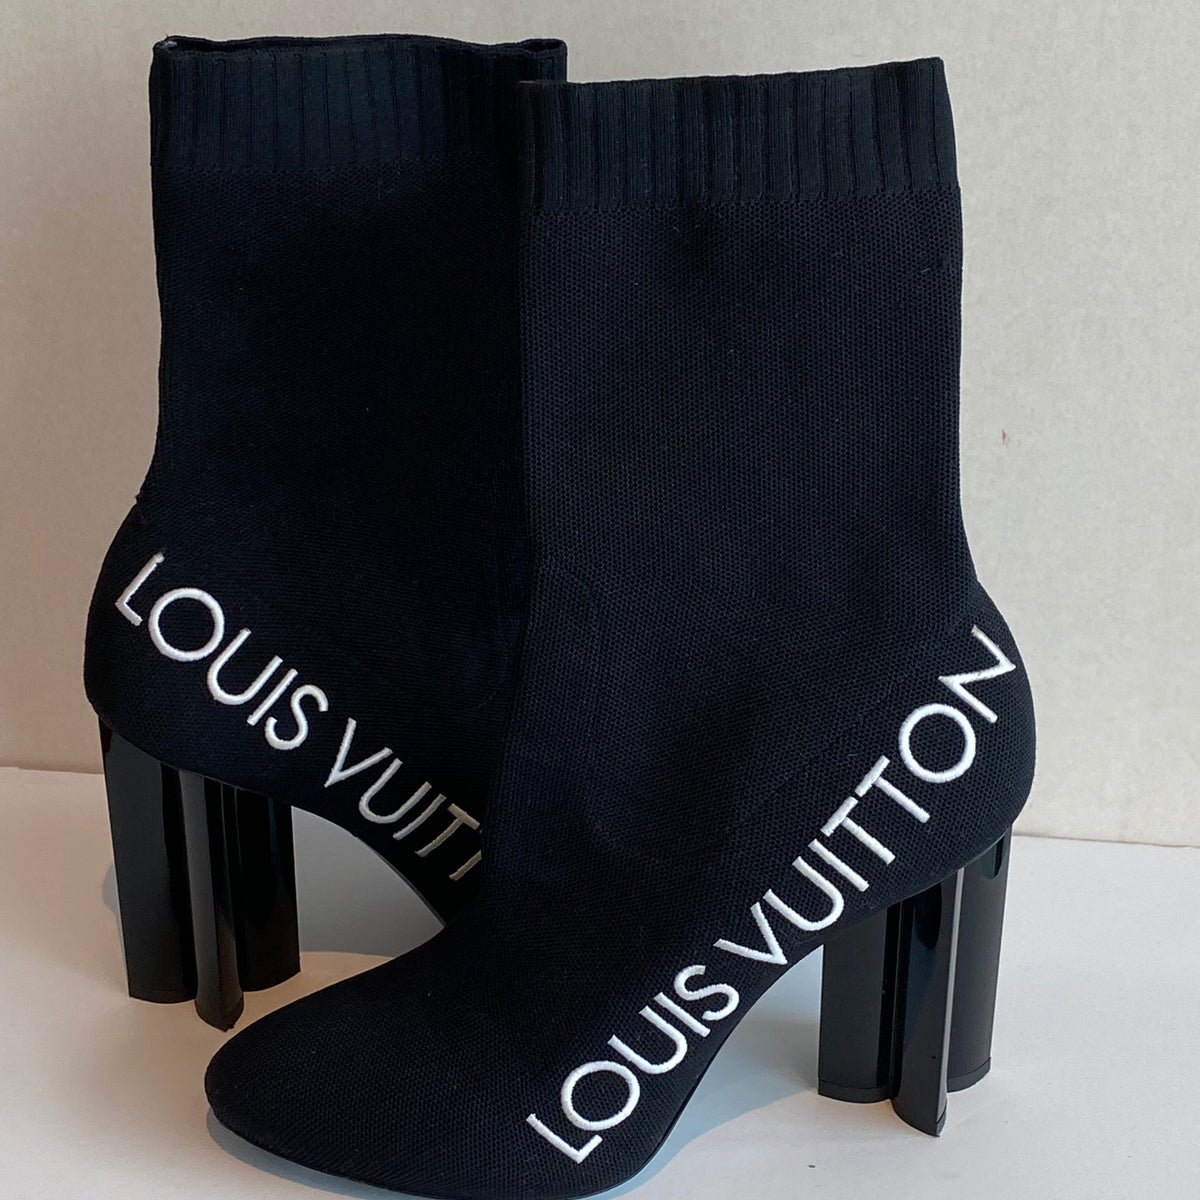 Shop Louis Vuitton Monogram Leather Block Heels Logo Ankle & Booties Boots  (1A8558 1A855C, SILHOUETTE ANKLE BOOT, 1A855A 1A855E 1A8554 1A8556) by  Mikrie